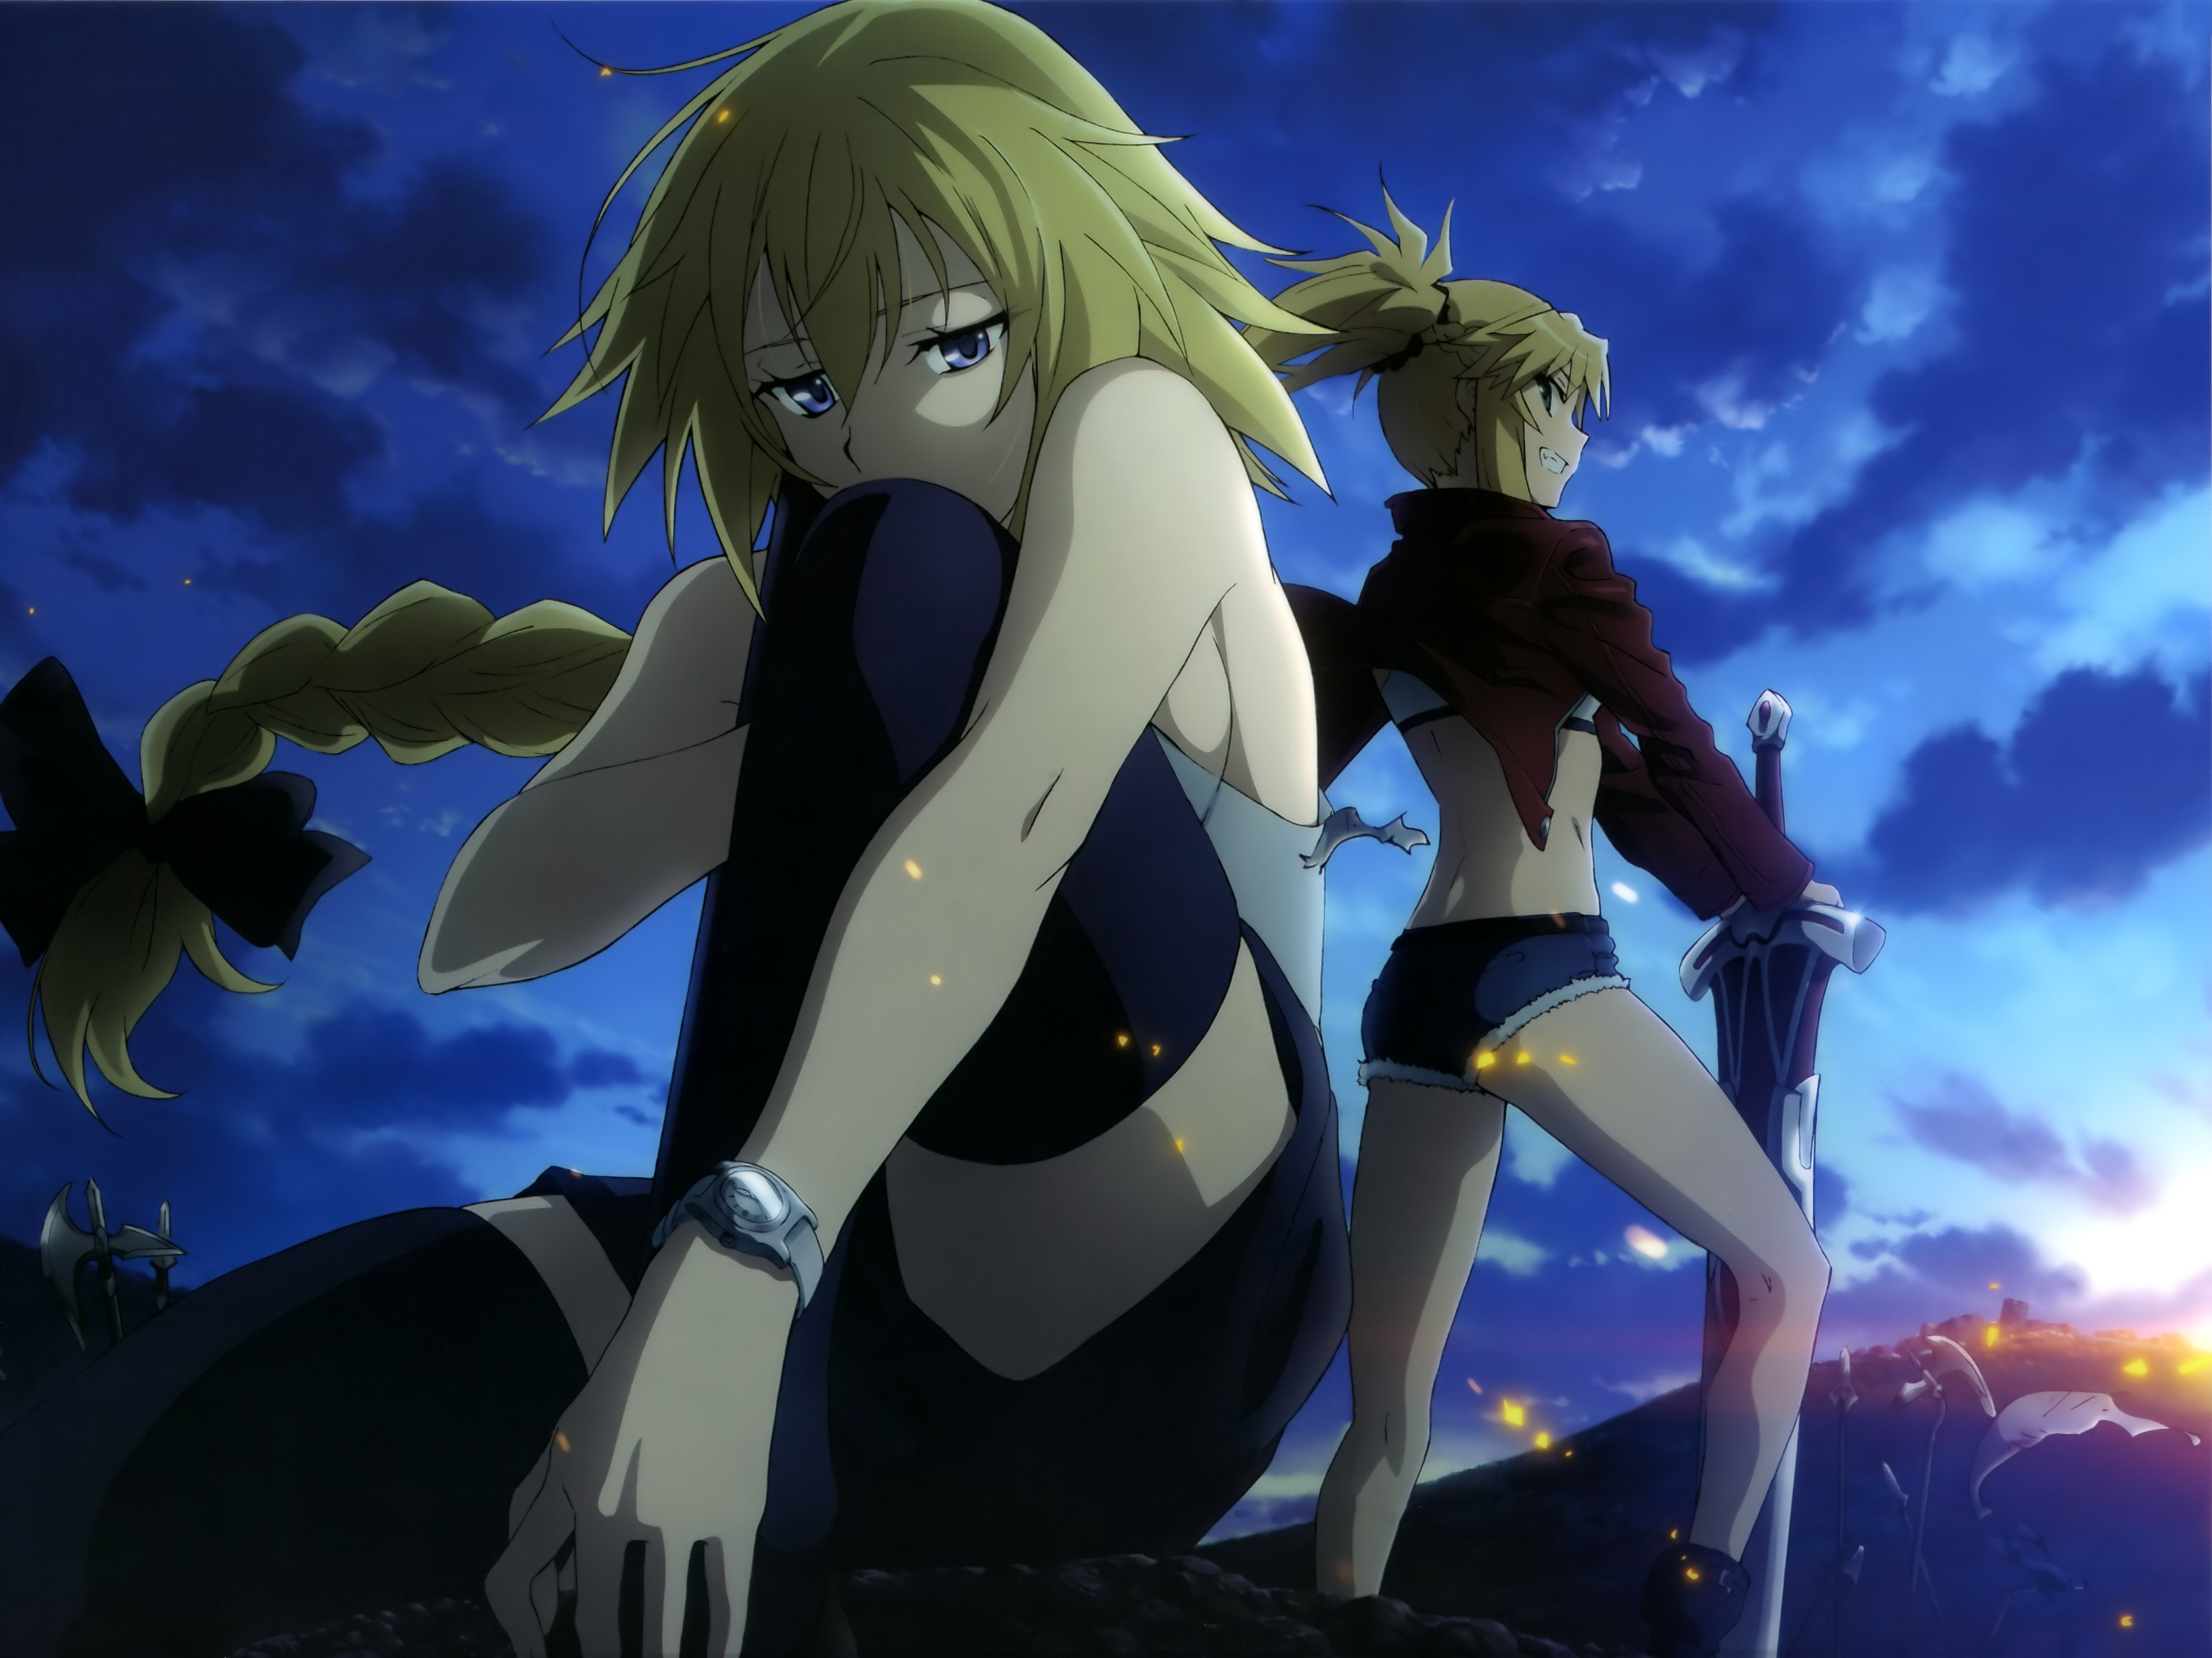 24 4k Ultra Hd Ruler Fate Apocrypha Wallpapers Background Images Wallpaper Abyss